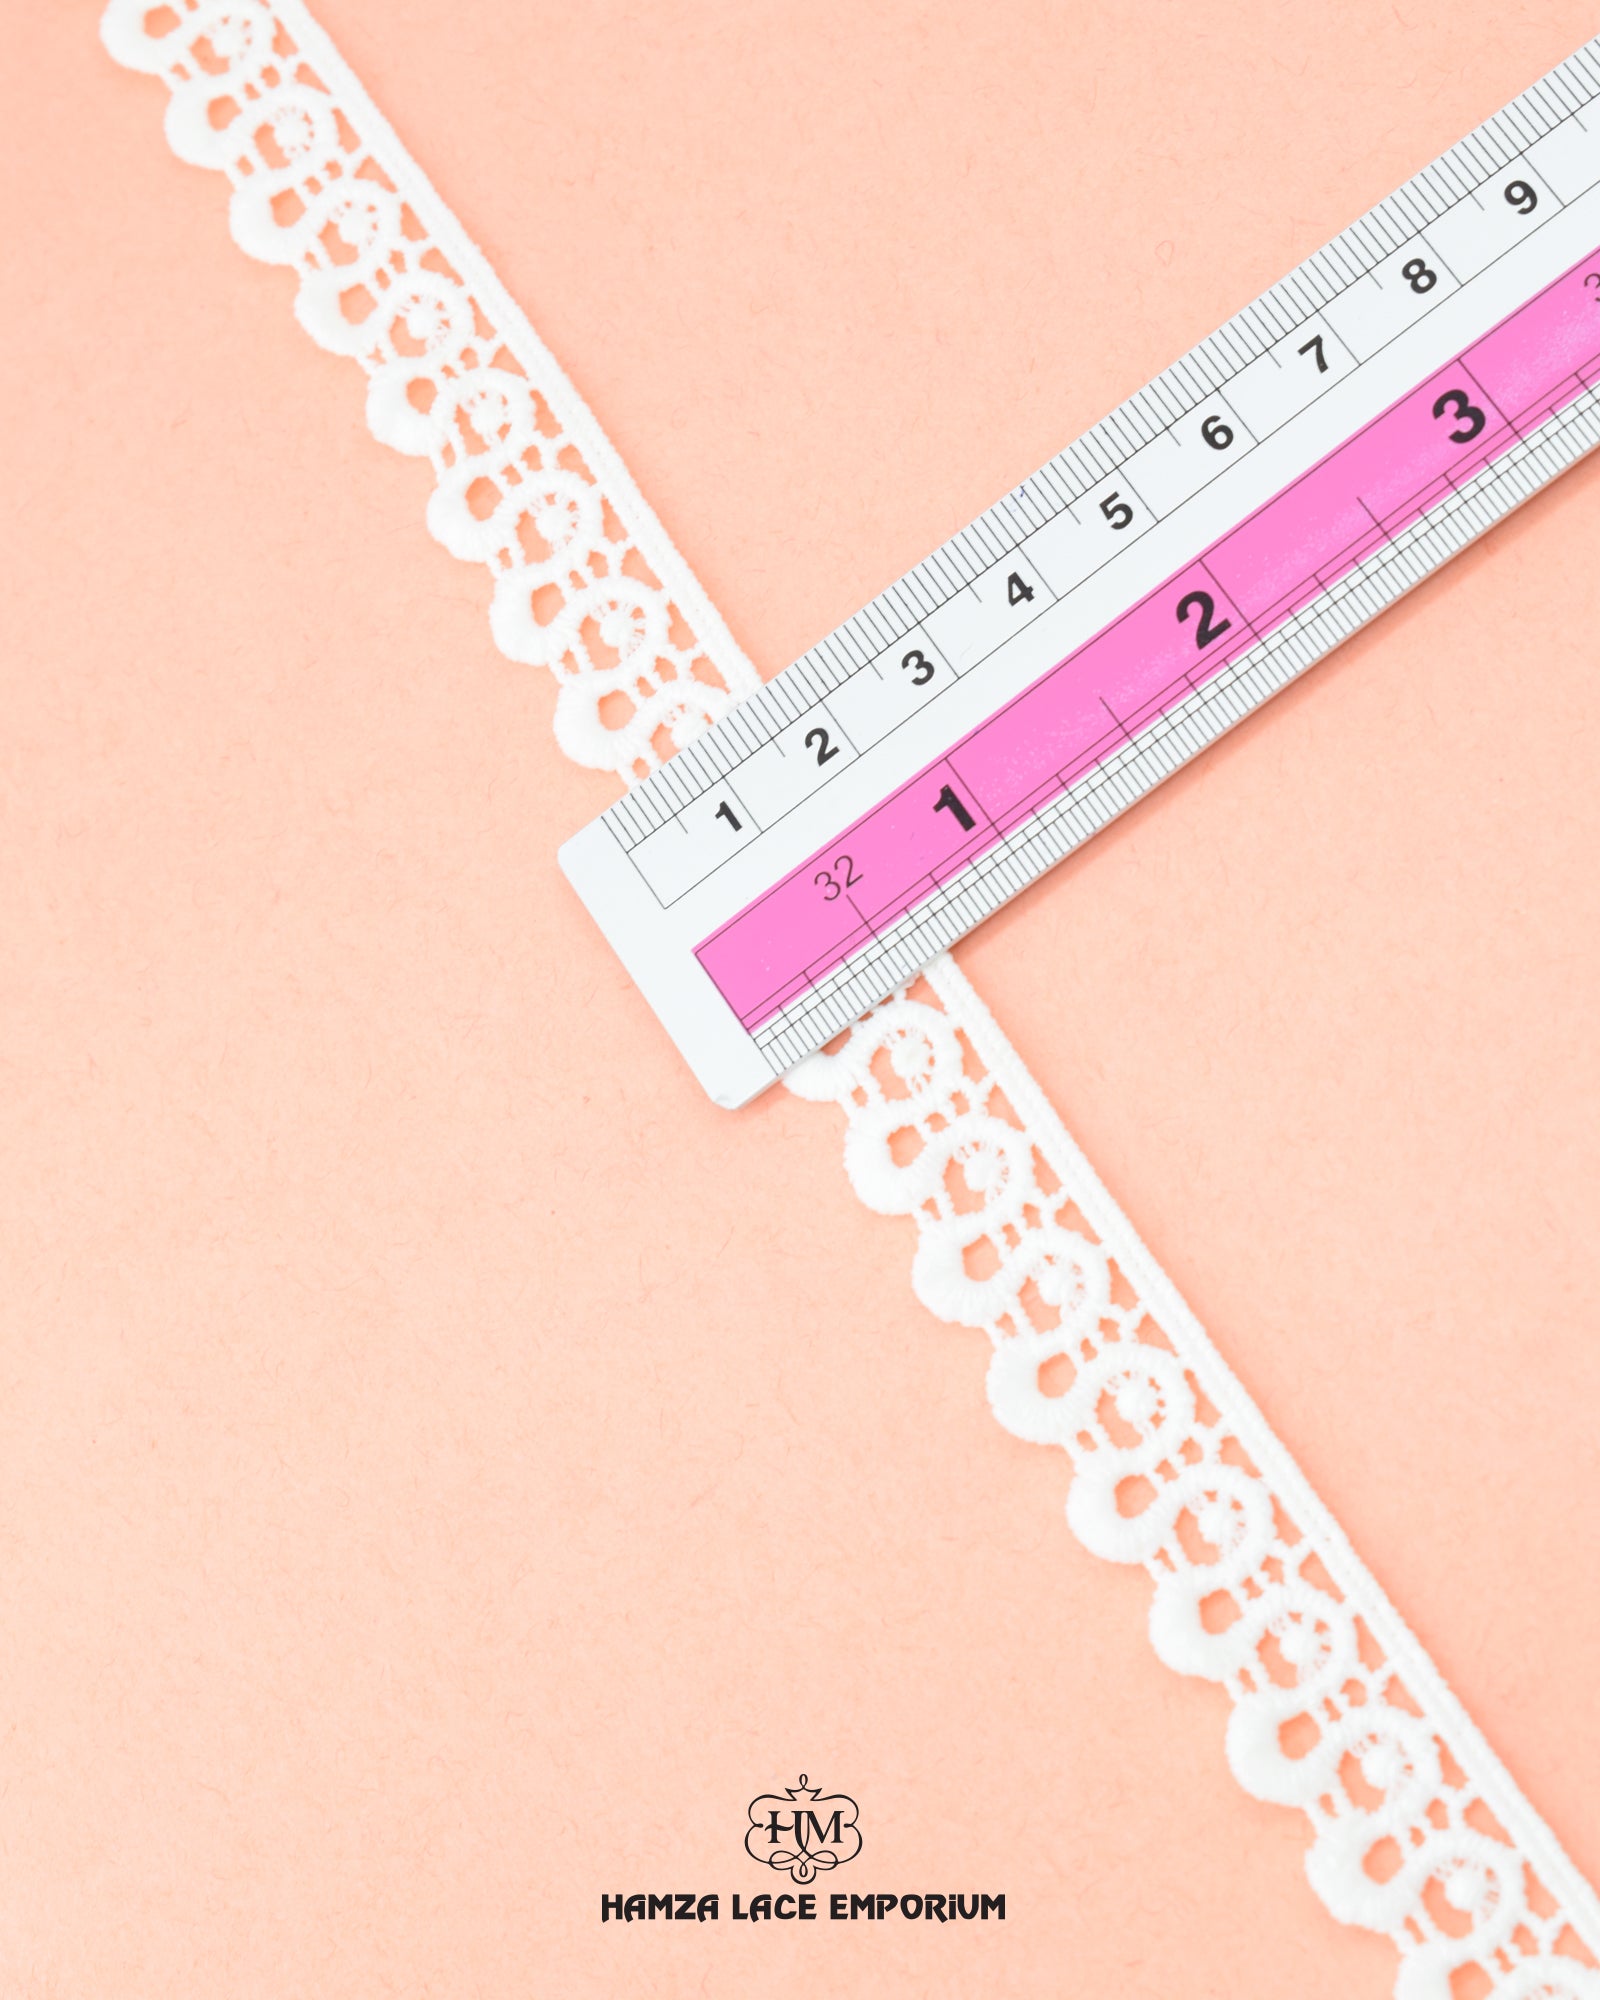 Size of the 'Edging Loop Lace 23389' is shown as '0.75' inch with the help of a ruler